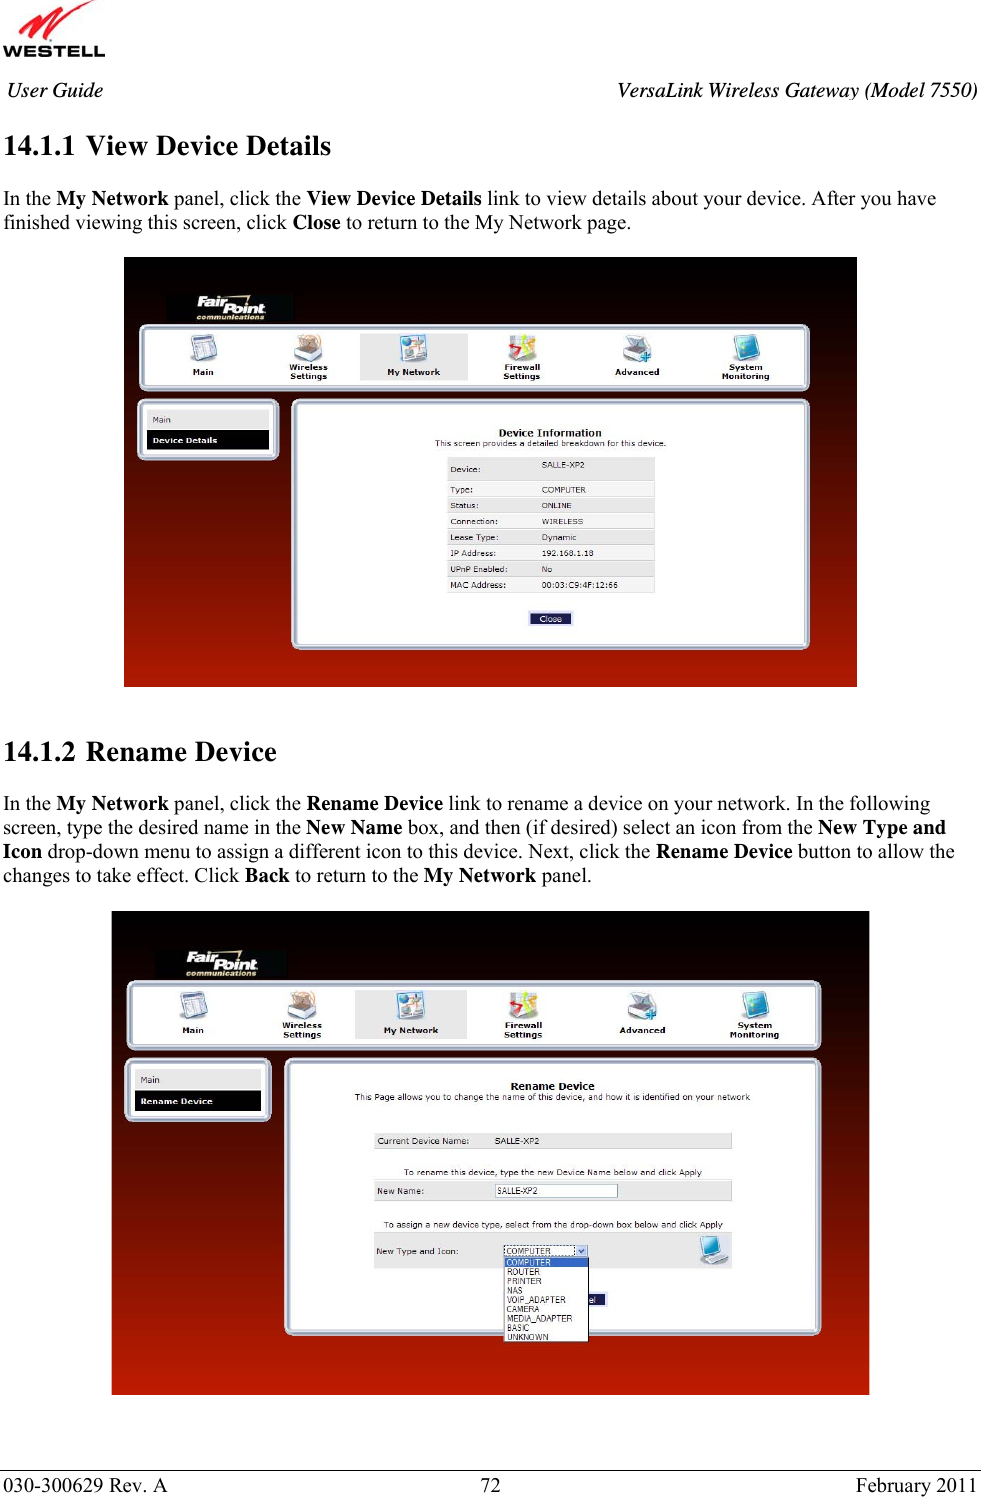       030-300629 Rev. A  72       February 2011 User Guide  VersaLink Wireless Gateway (Model 7550) 14.1.1  View Device Details  In the My Network panel, click the View Device Details link to view details about your device. After you have finished viewing this screen, click Close to return to the My Network page.     14.1.2  Rename Device  In the My Network panel, click the Rename Device link to rename a device on your network. In the following screen, type the desired name in the New Name box, and then (if desired) select an icon from the New Type and Icon drop-down menu to assign a different icon to this device. Next, click the Rename Device button to allow the changes to take effect. Click Back to return to the My Network panel.     